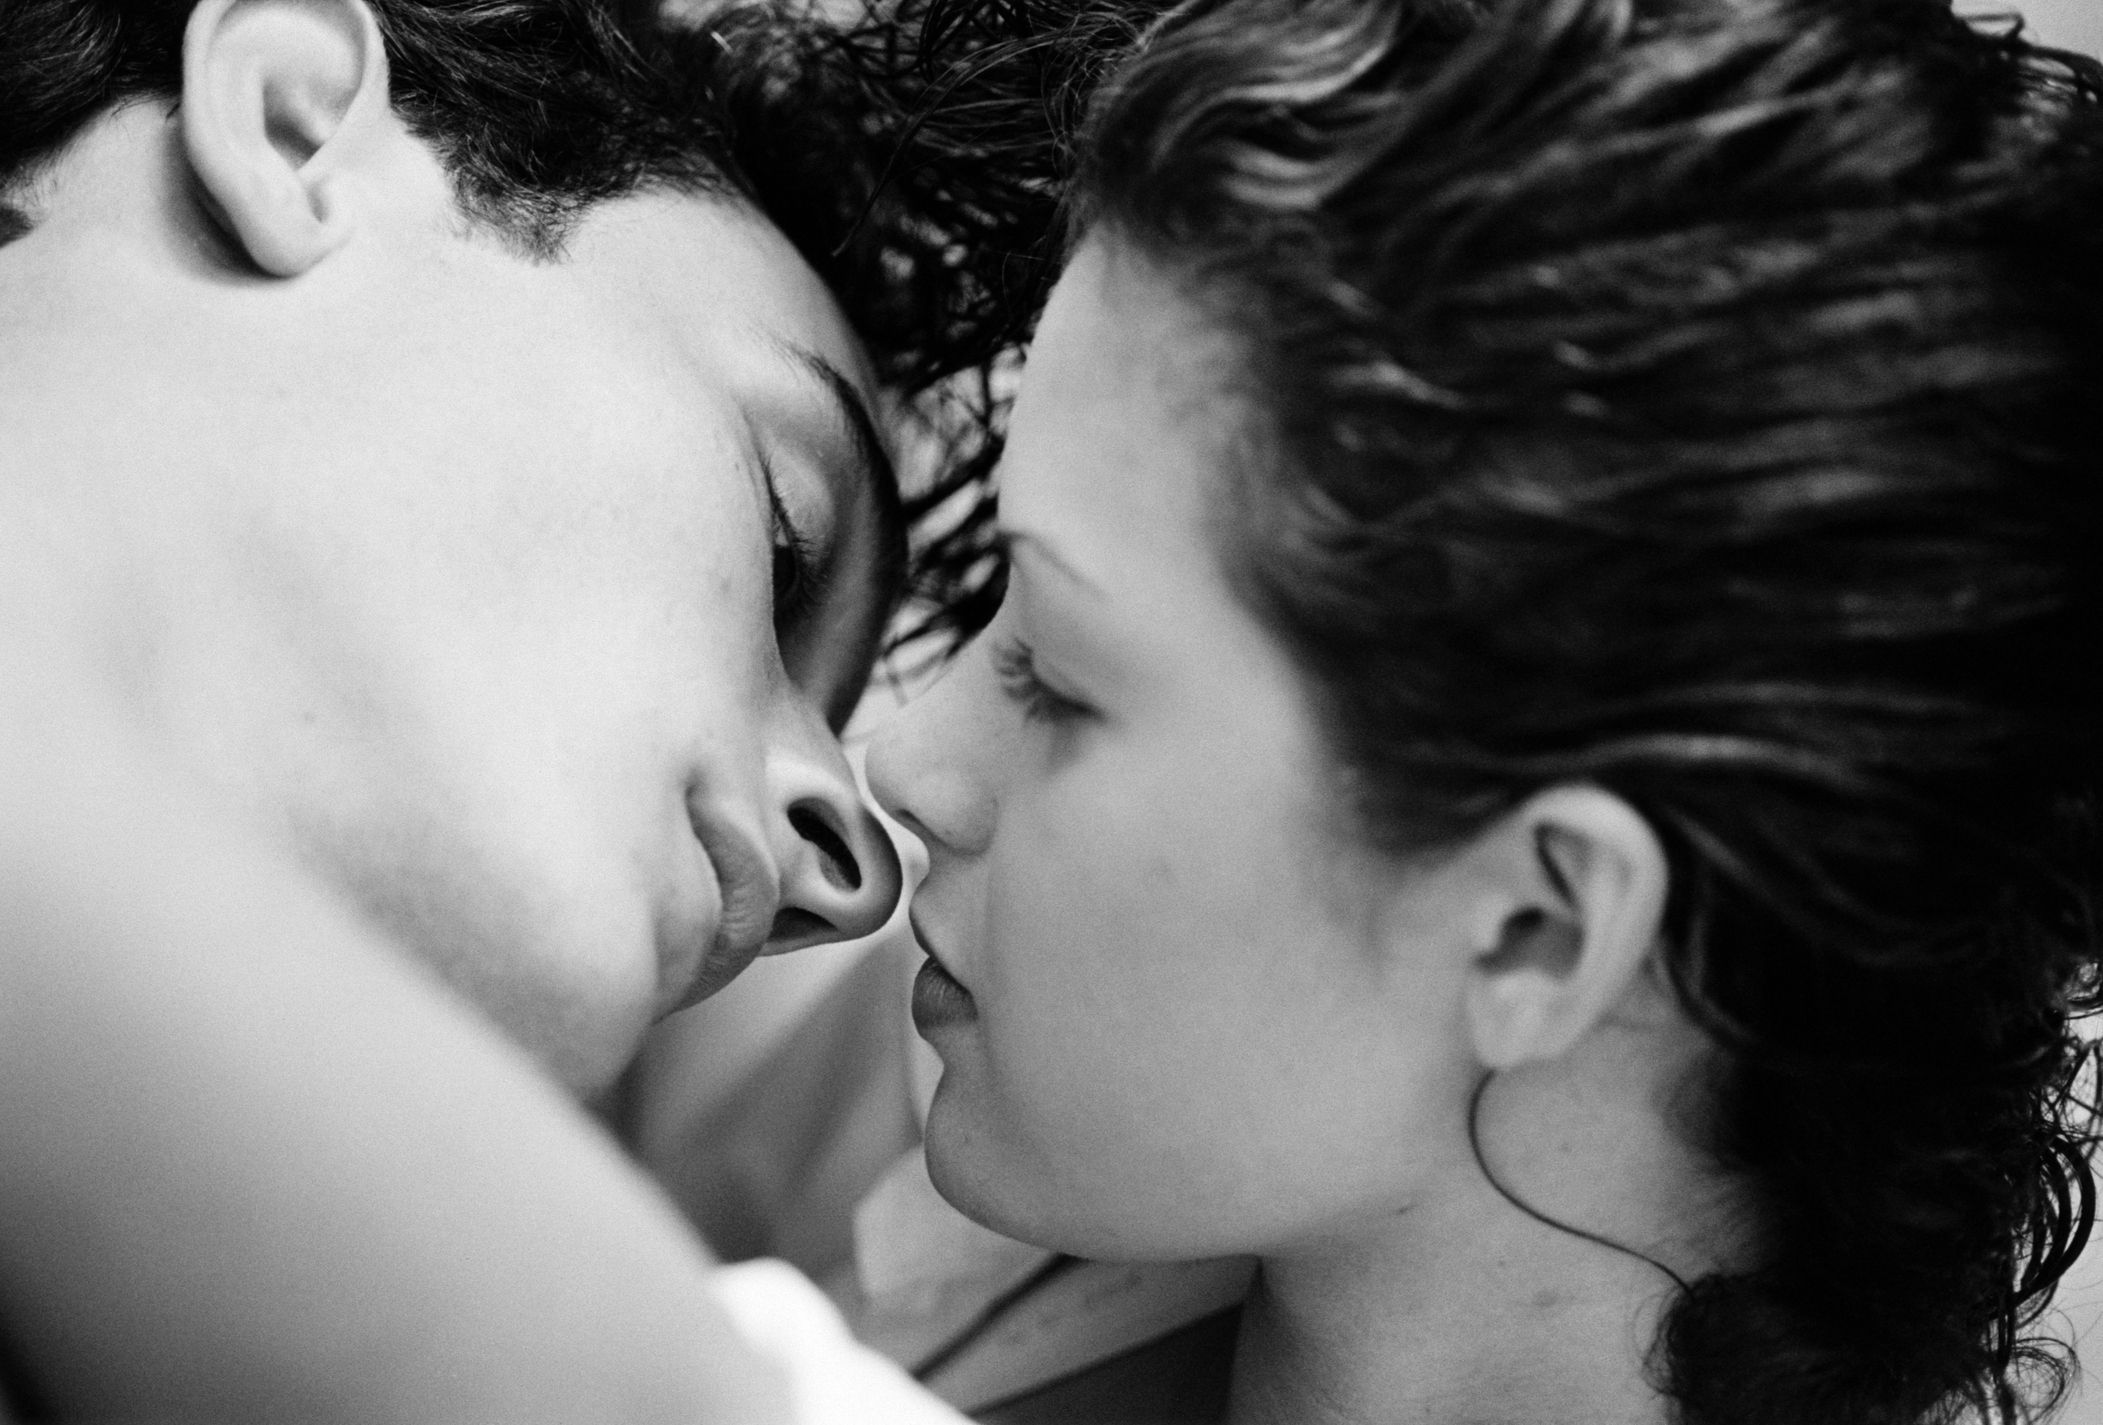 Sexy And Hot Kissing Rape - 35 Common Sexual Fantasies to Try, According To Experts